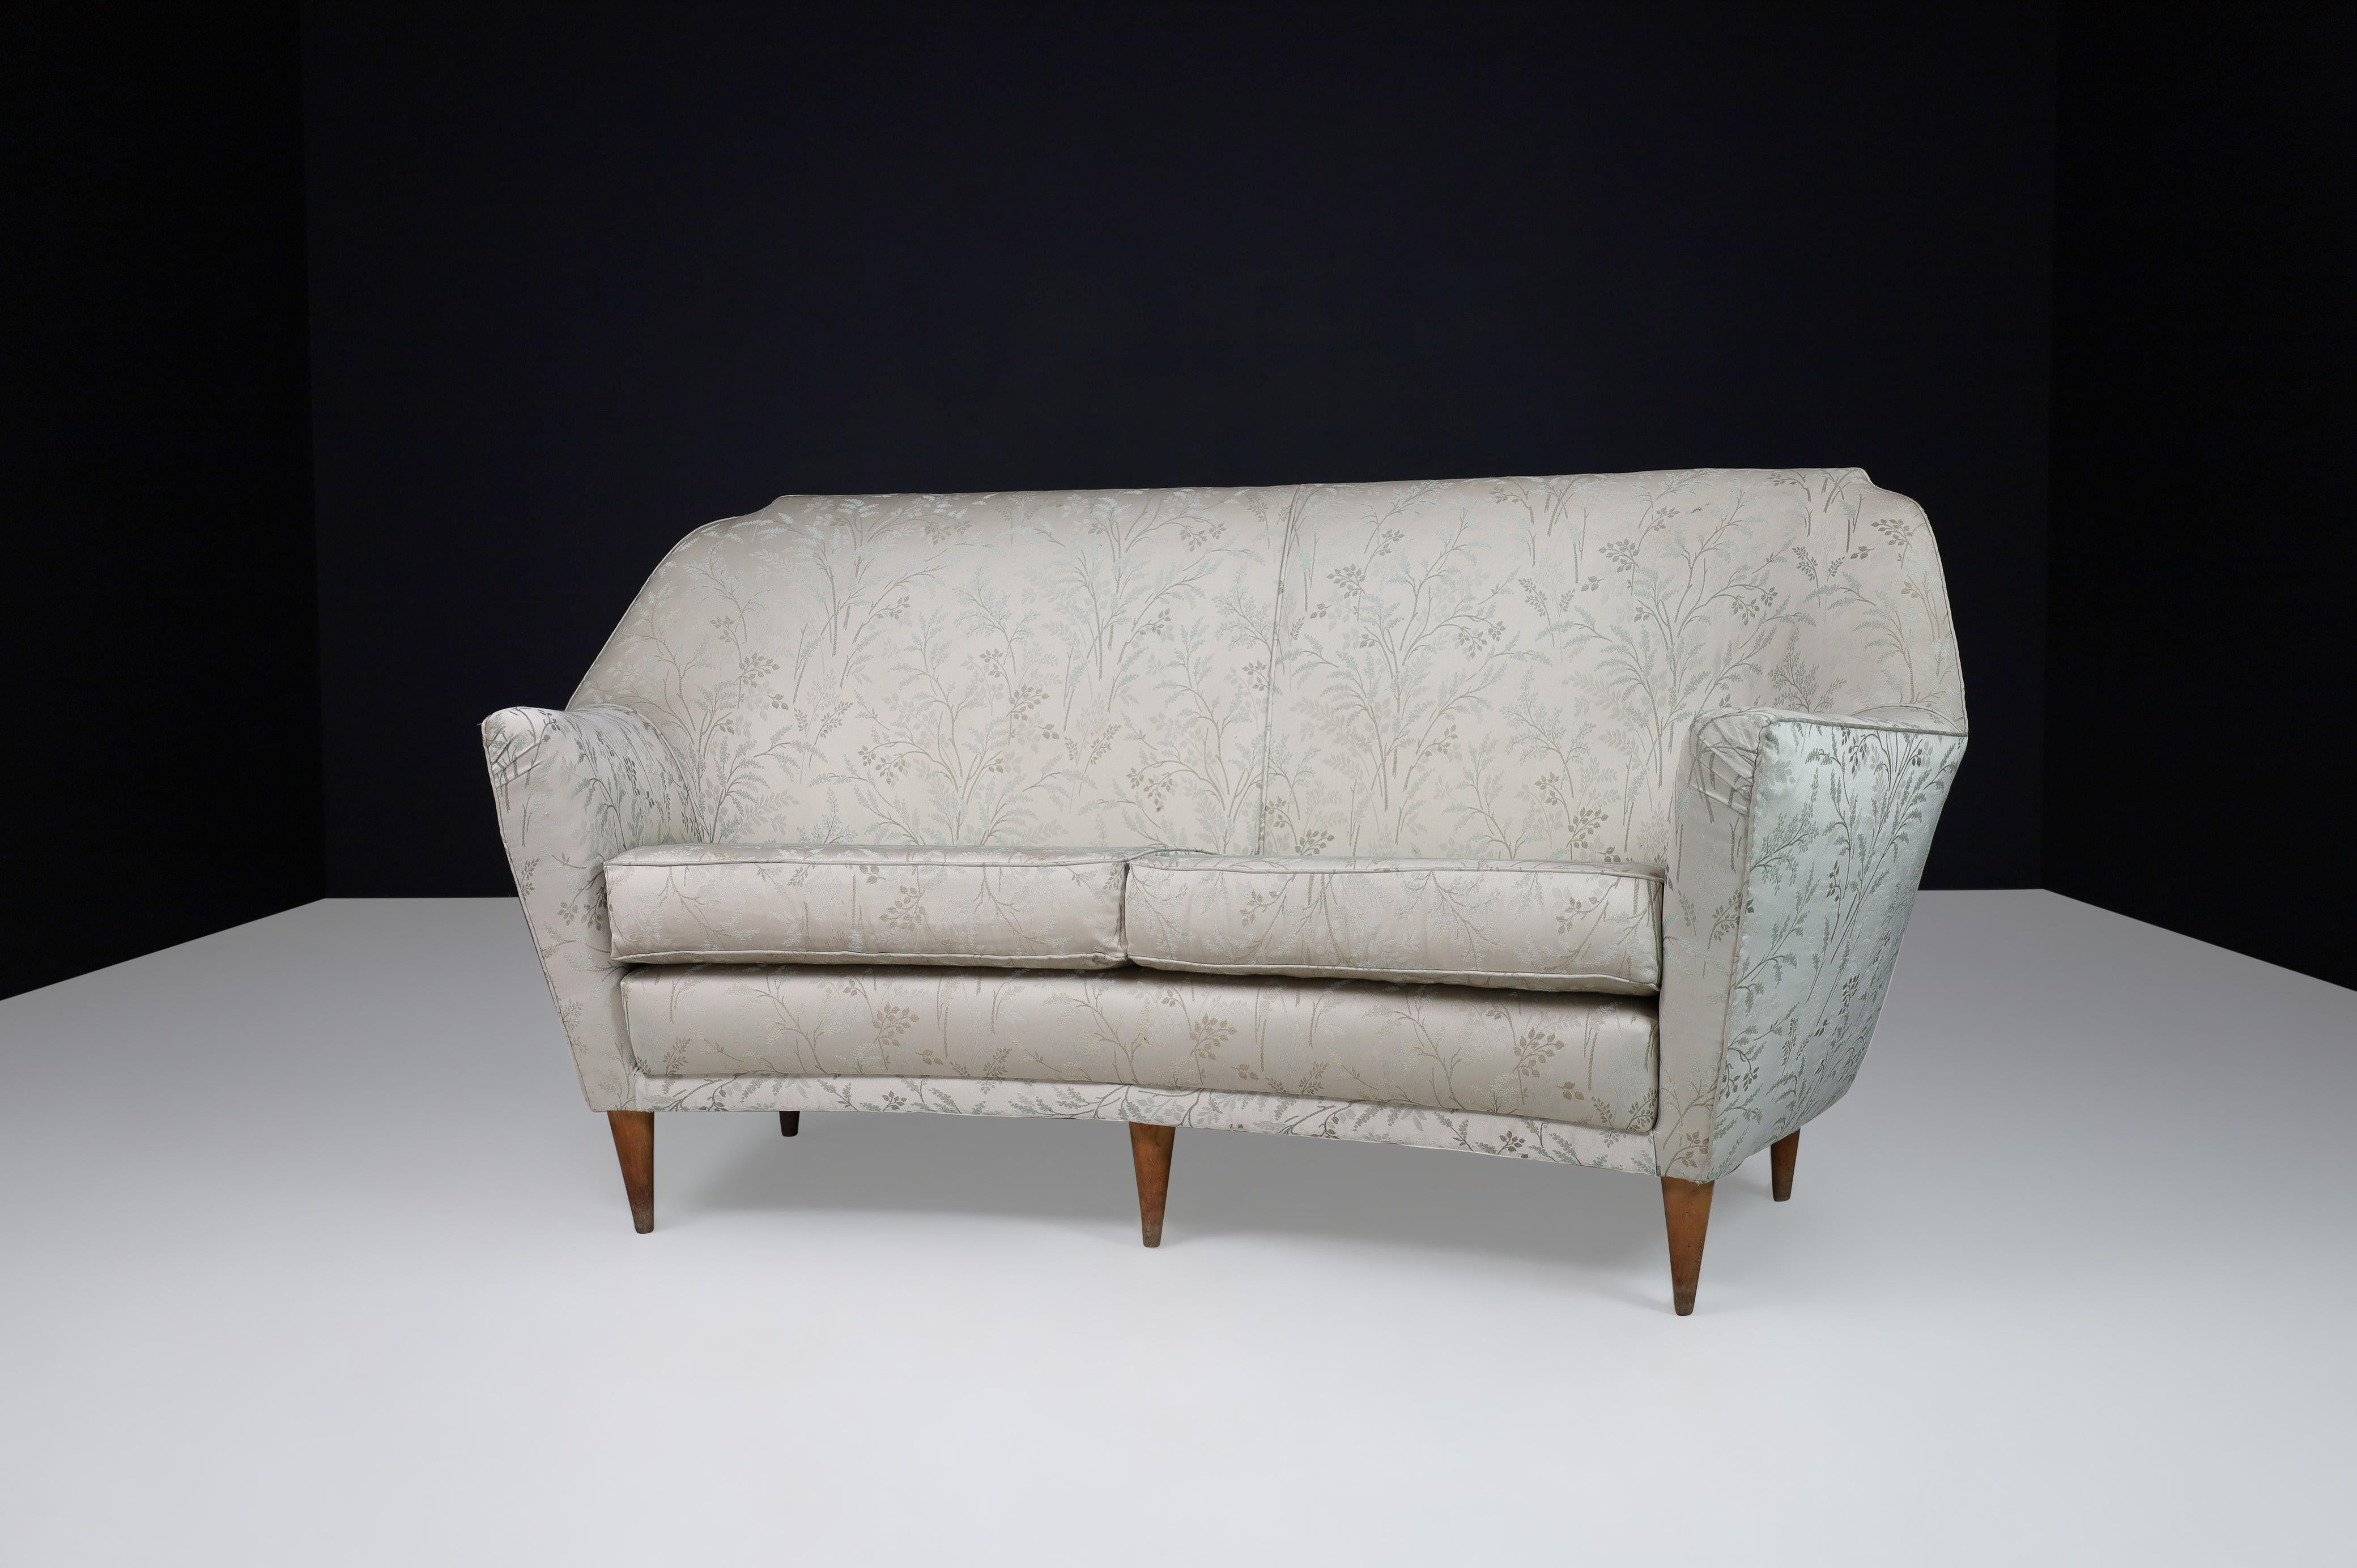 Mid-Century Modern Ico Parisi Sofa in Leaf Motif Fabric and Tapered Wooden Legs, Italy, 1950s For Sale